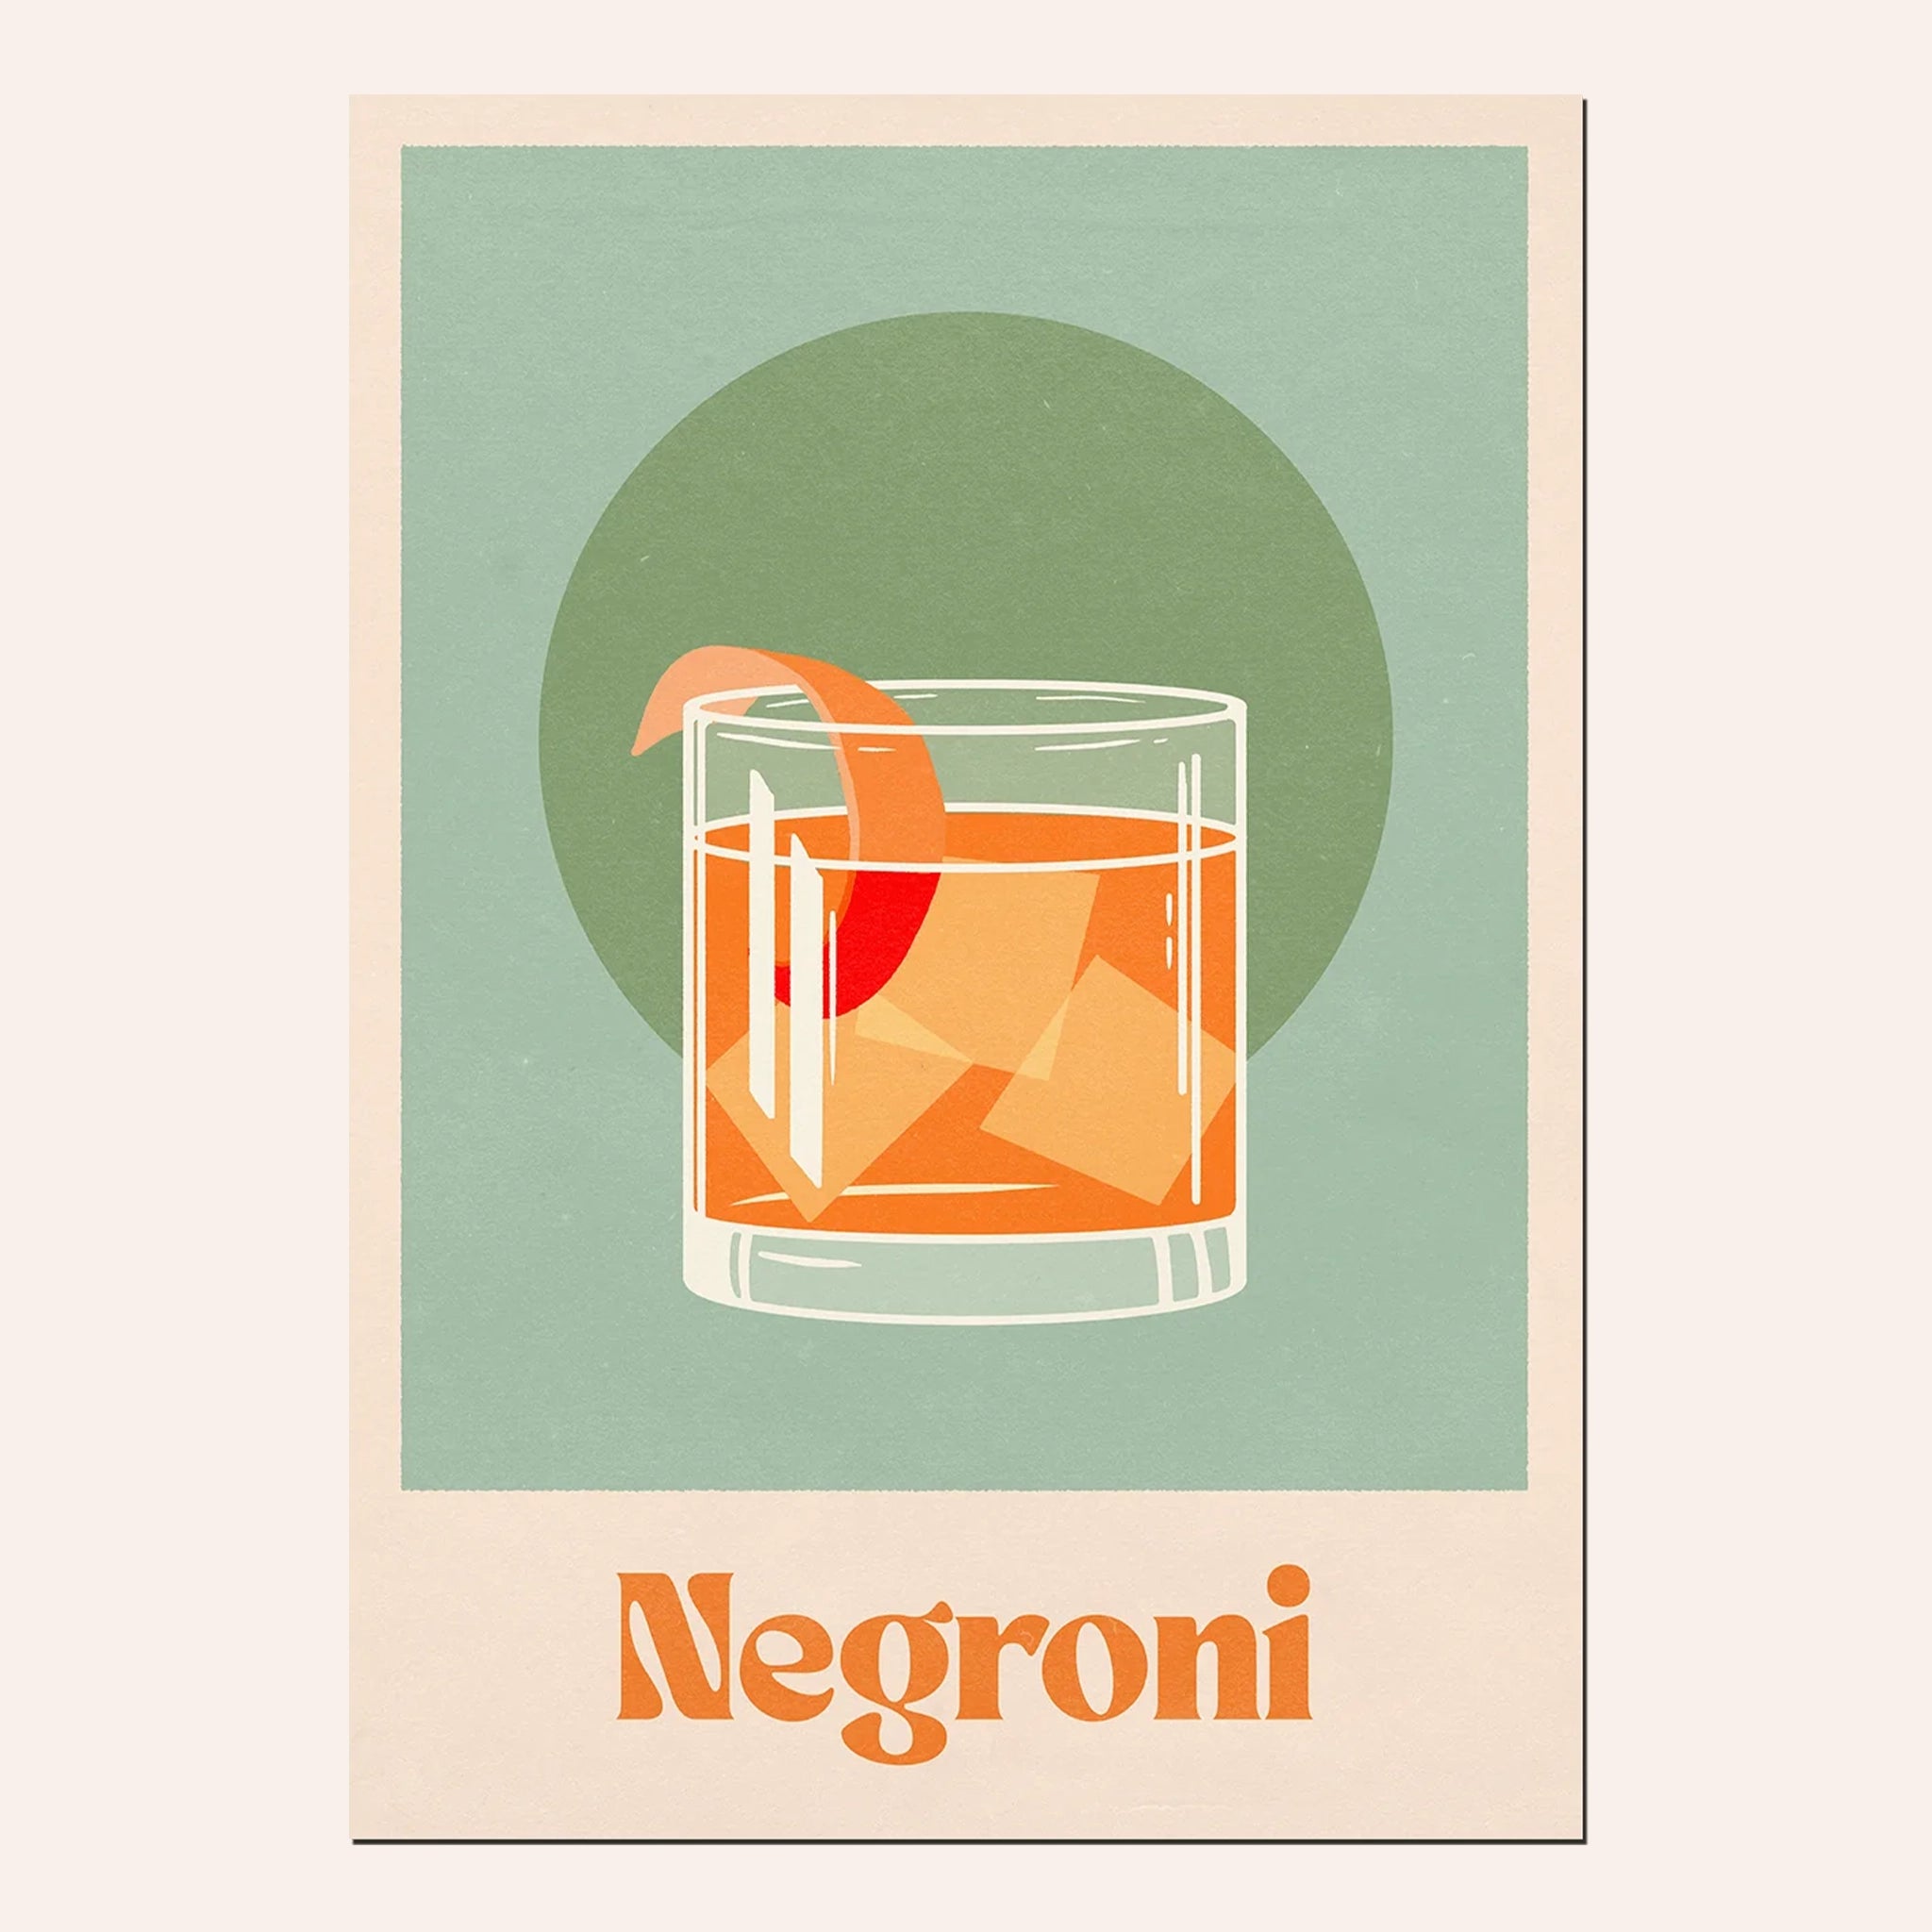 On a white background is a green art print with an off white border and orange text at the bottom that reads, "Negroni" as well as a graphic of a Negroni cocktail with an orange peel in the center.